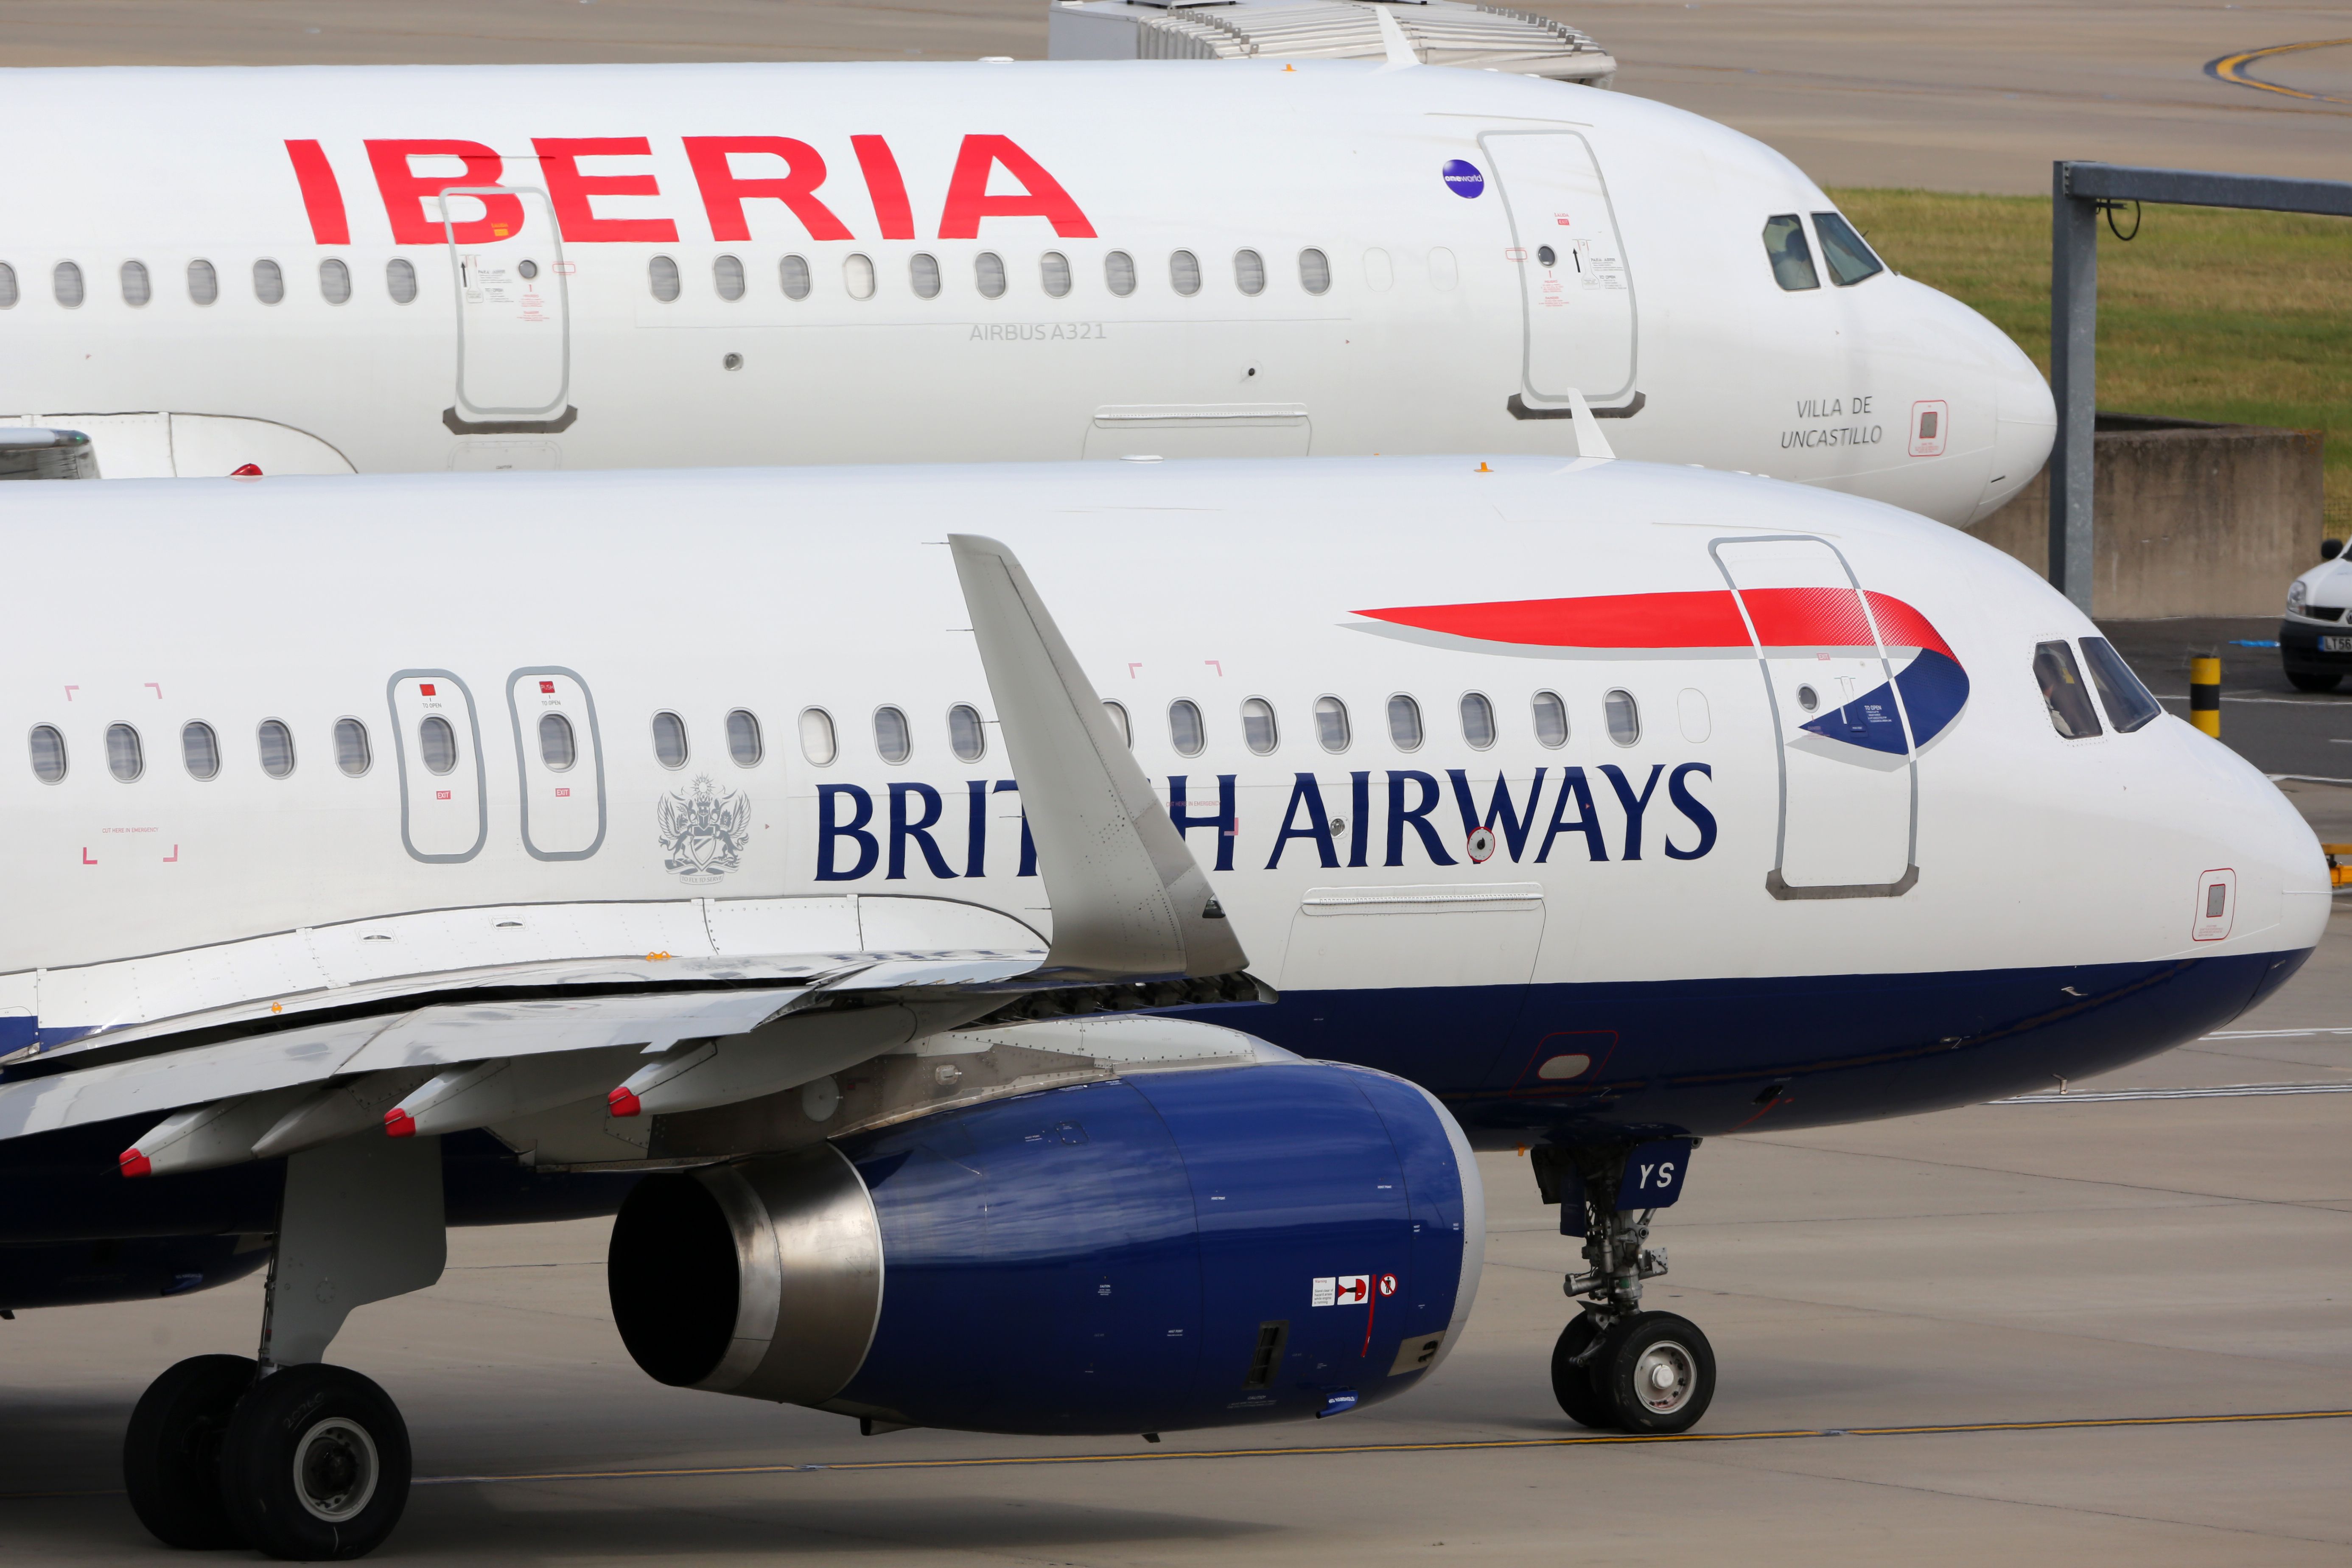 British Airways and Iberia aircraft side by side.